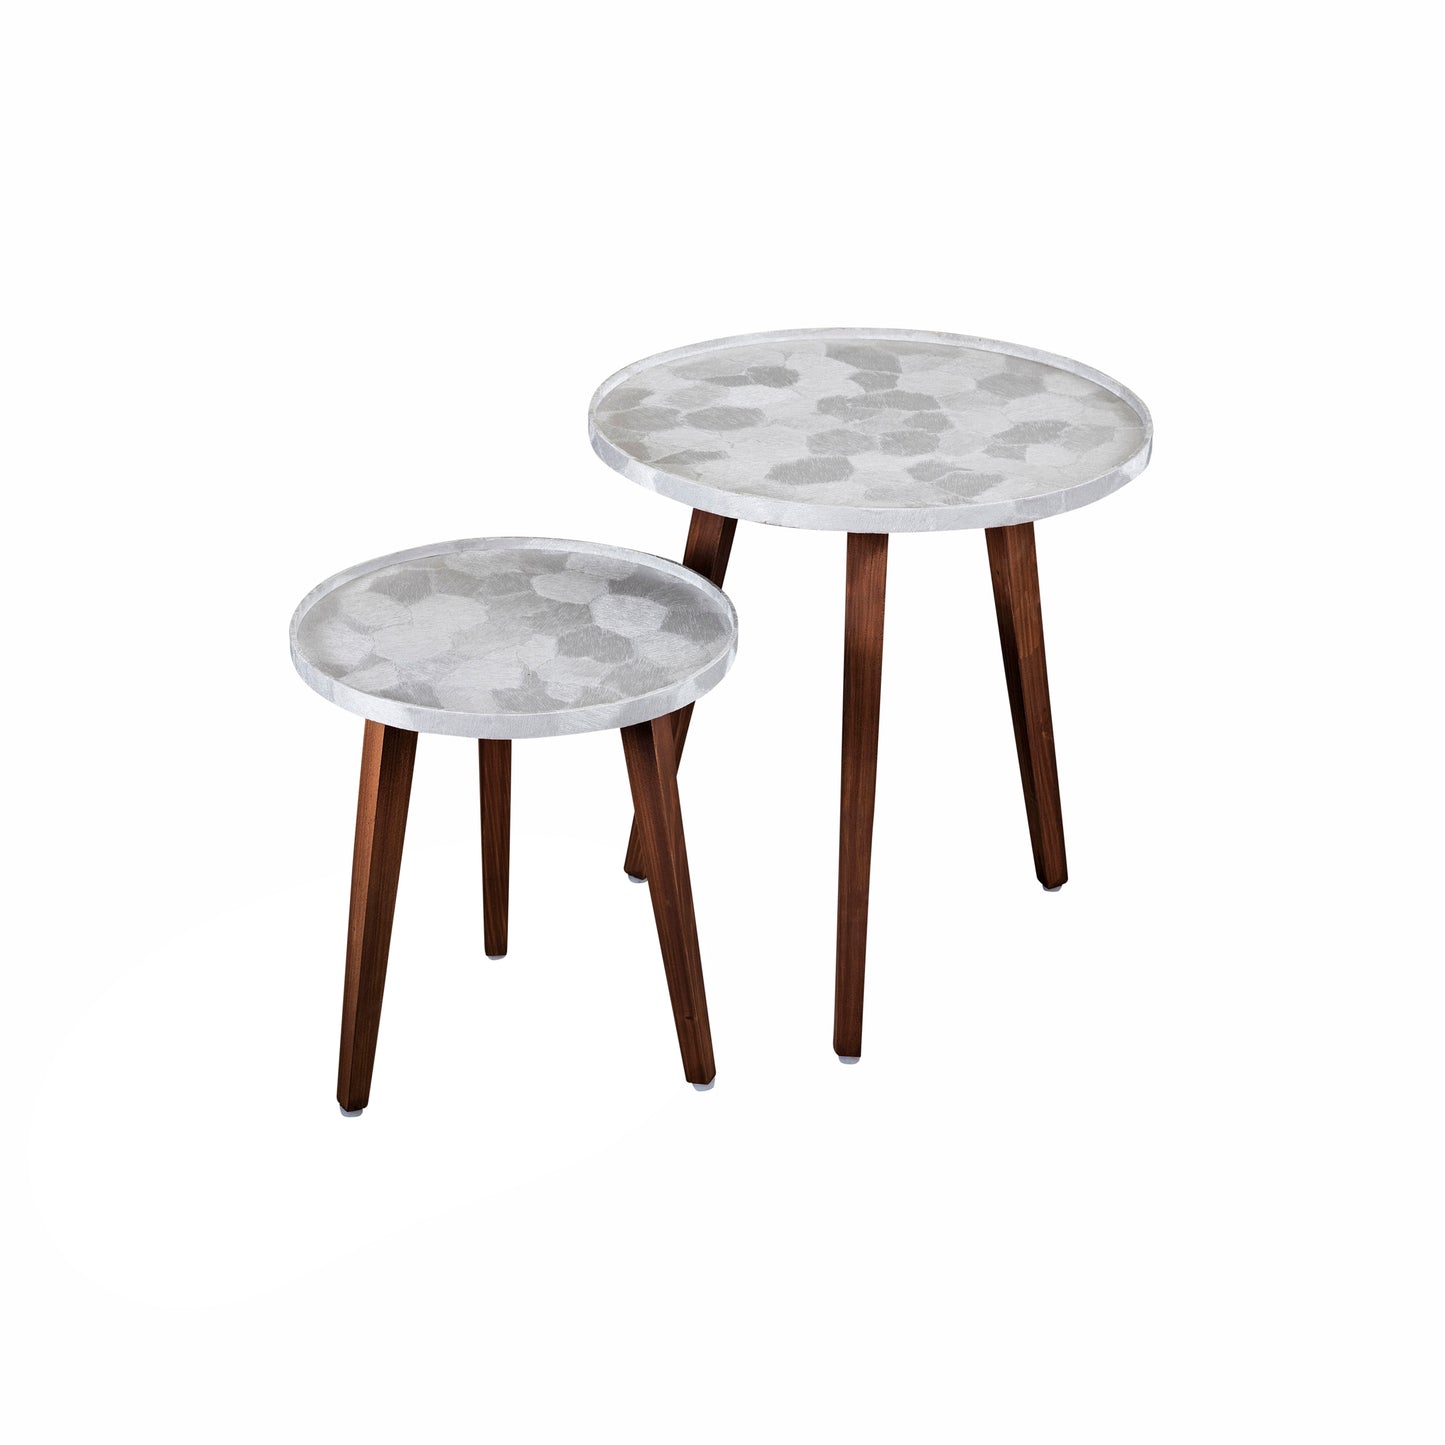 A Tiny Mistake Allure Silver Wooden Nesting Tables (Set of 2), Living Room Decor